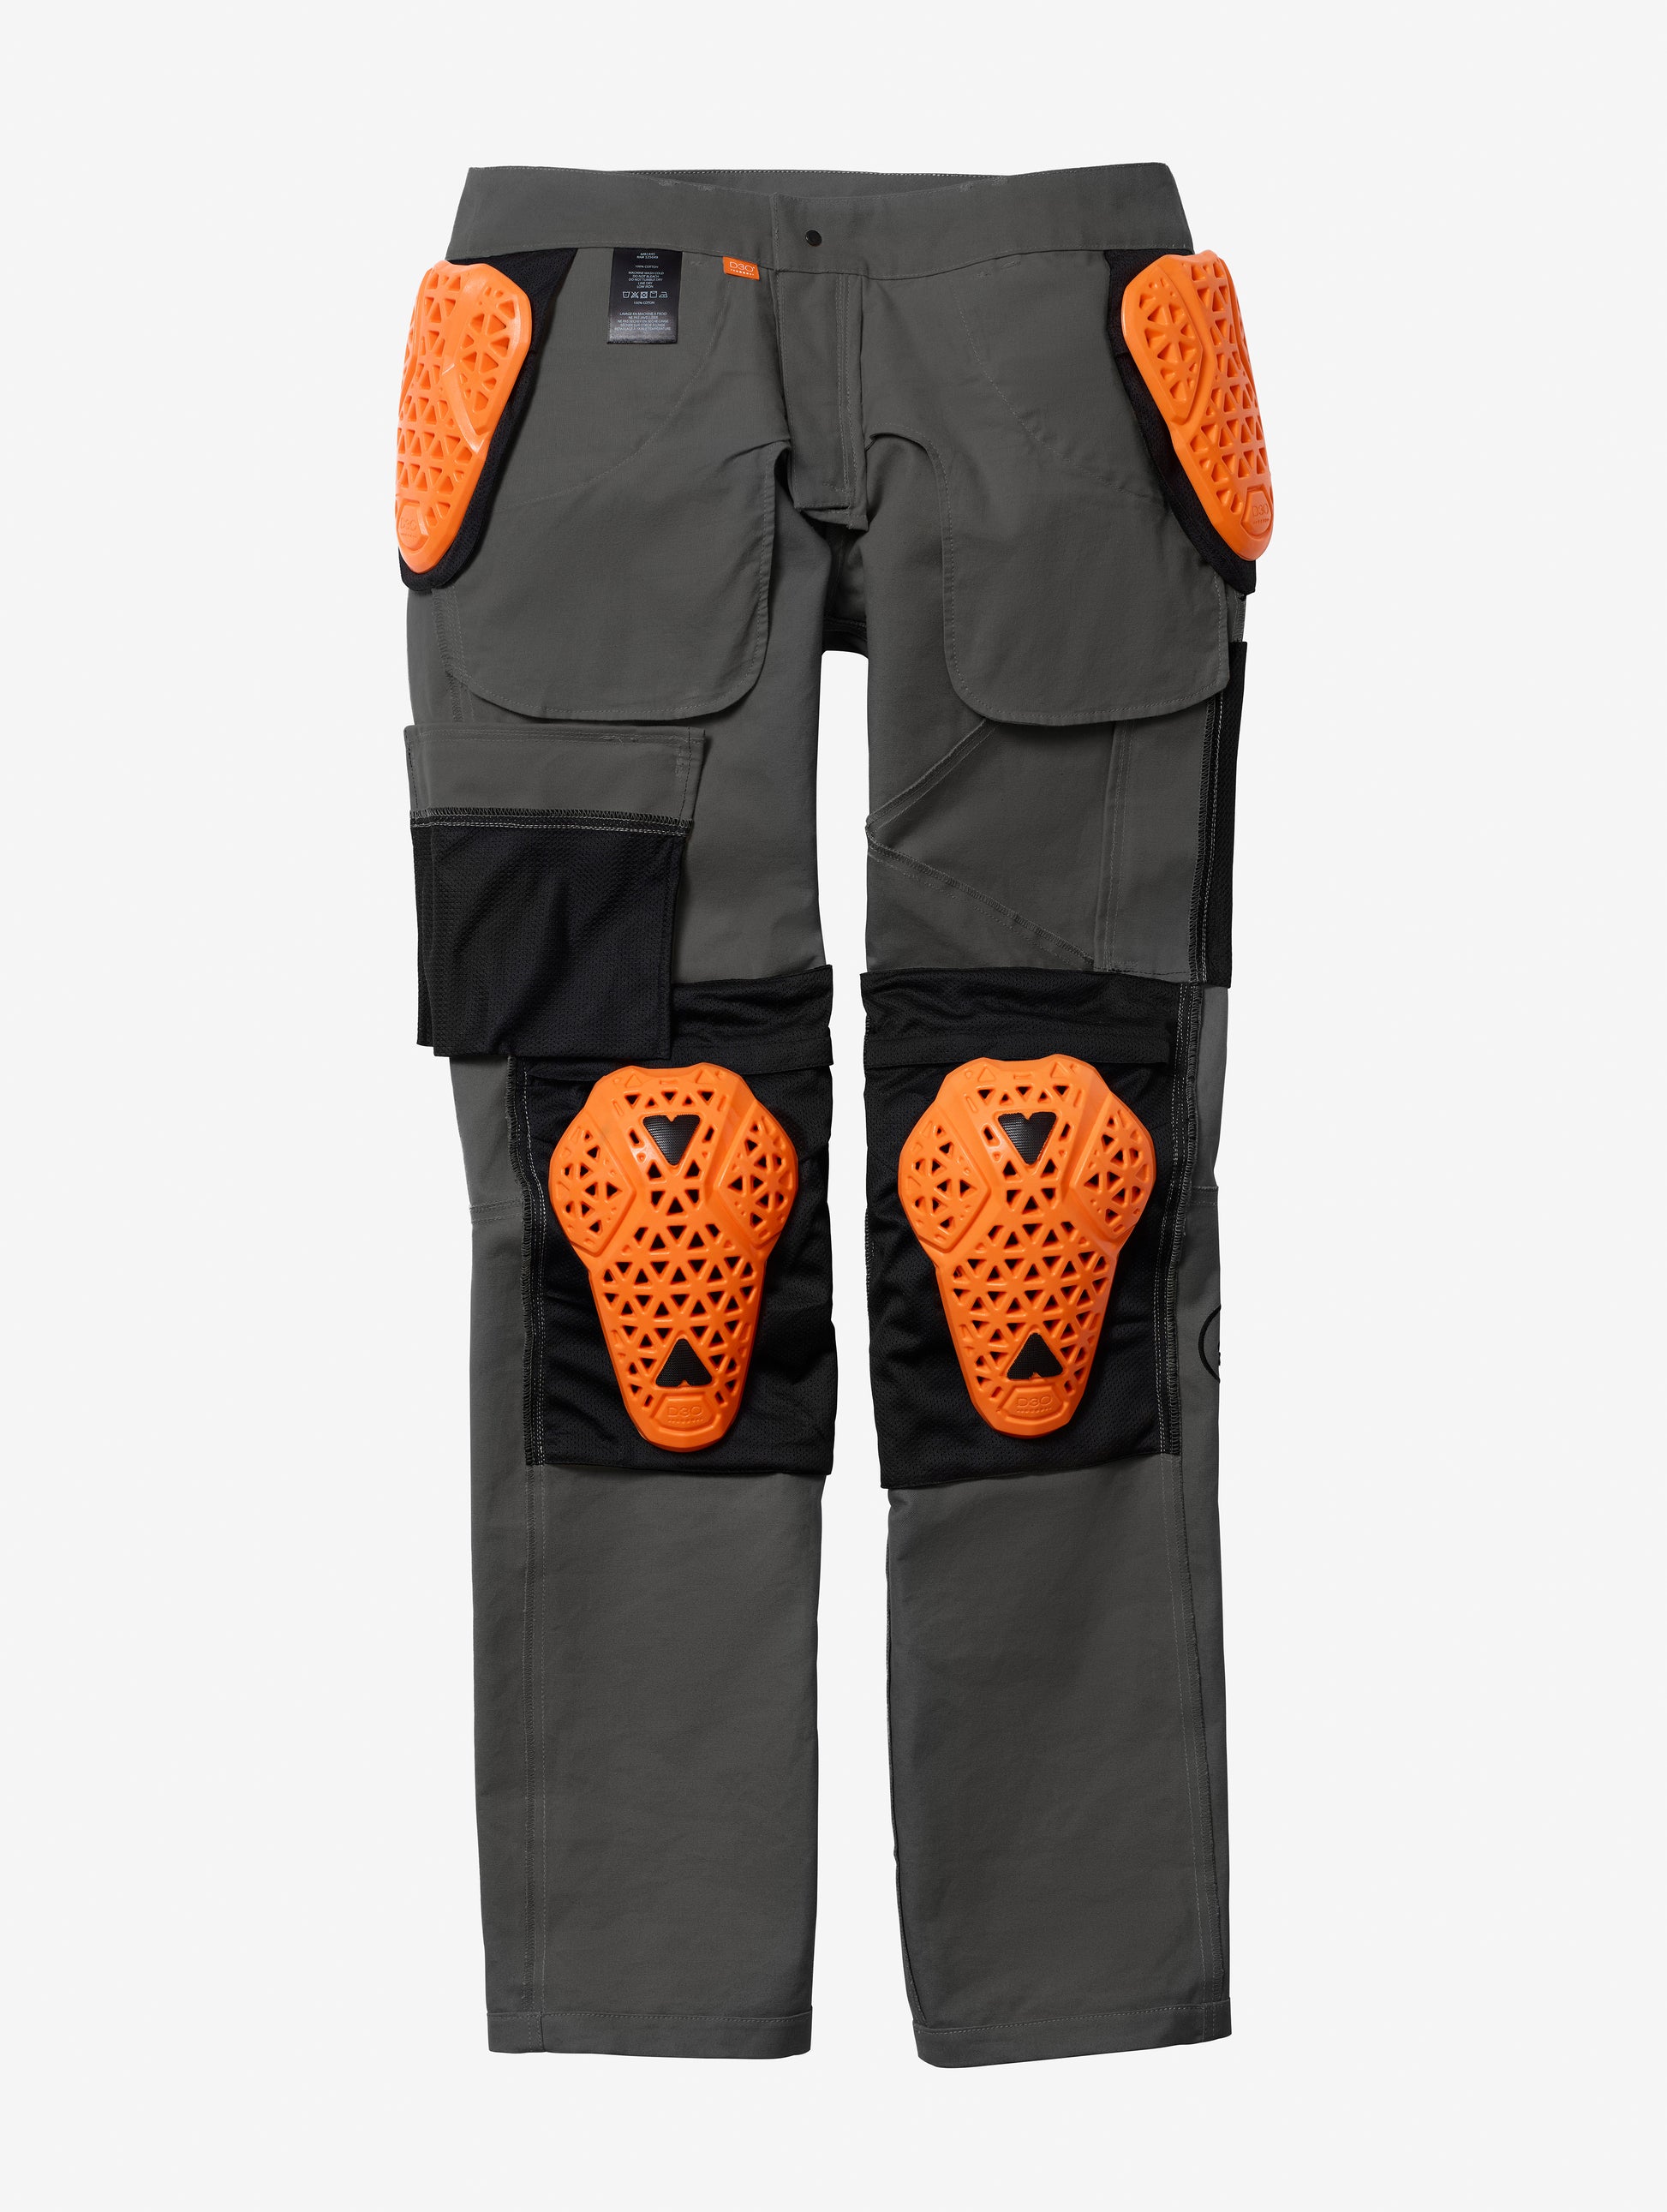 grey motorcycle pant with built-in knee articulation